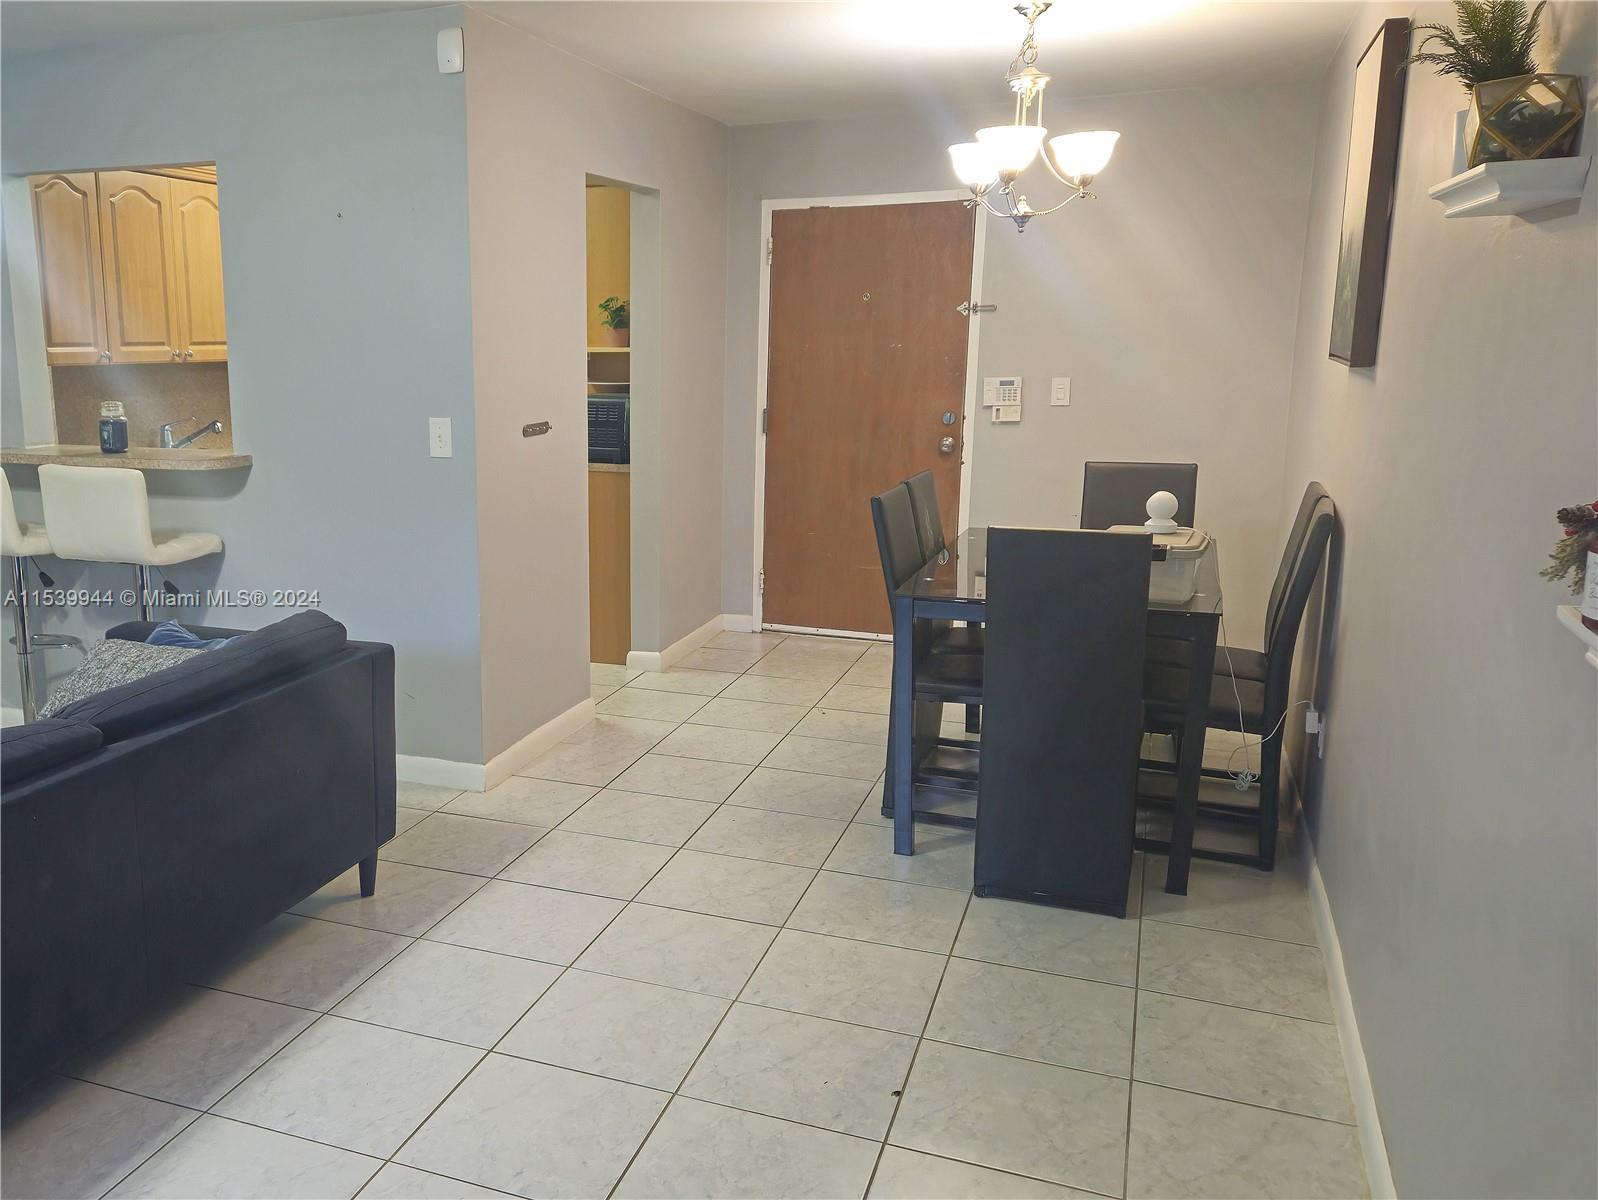 Cash Only. Condo located on the 1st floor in Kendall Acres Community. Features tile flooring through